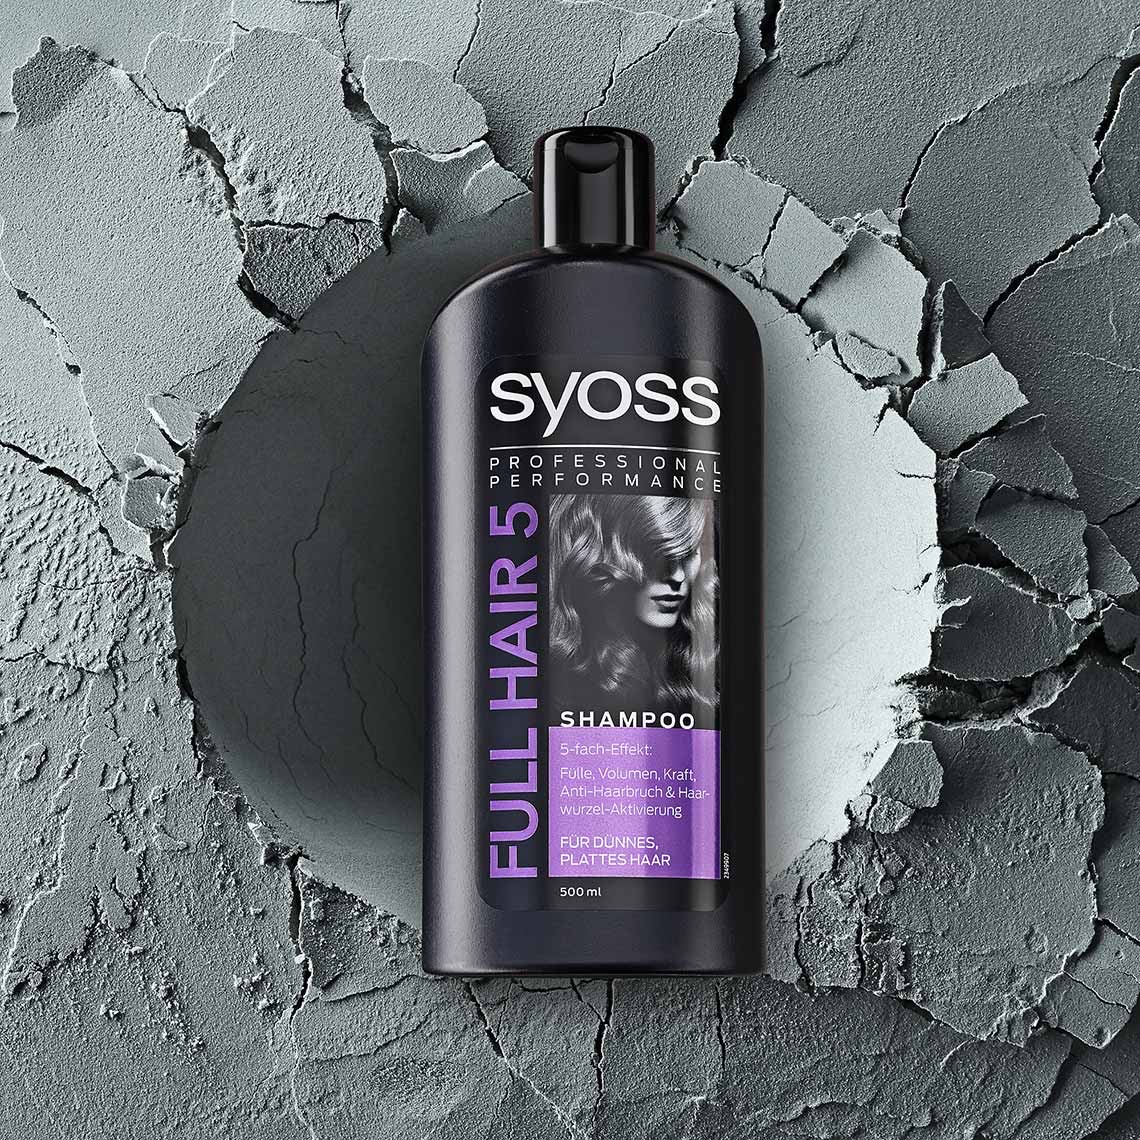 Shampoo with Texture • Marc Wuchner • Cosmetic and Texture Photographer